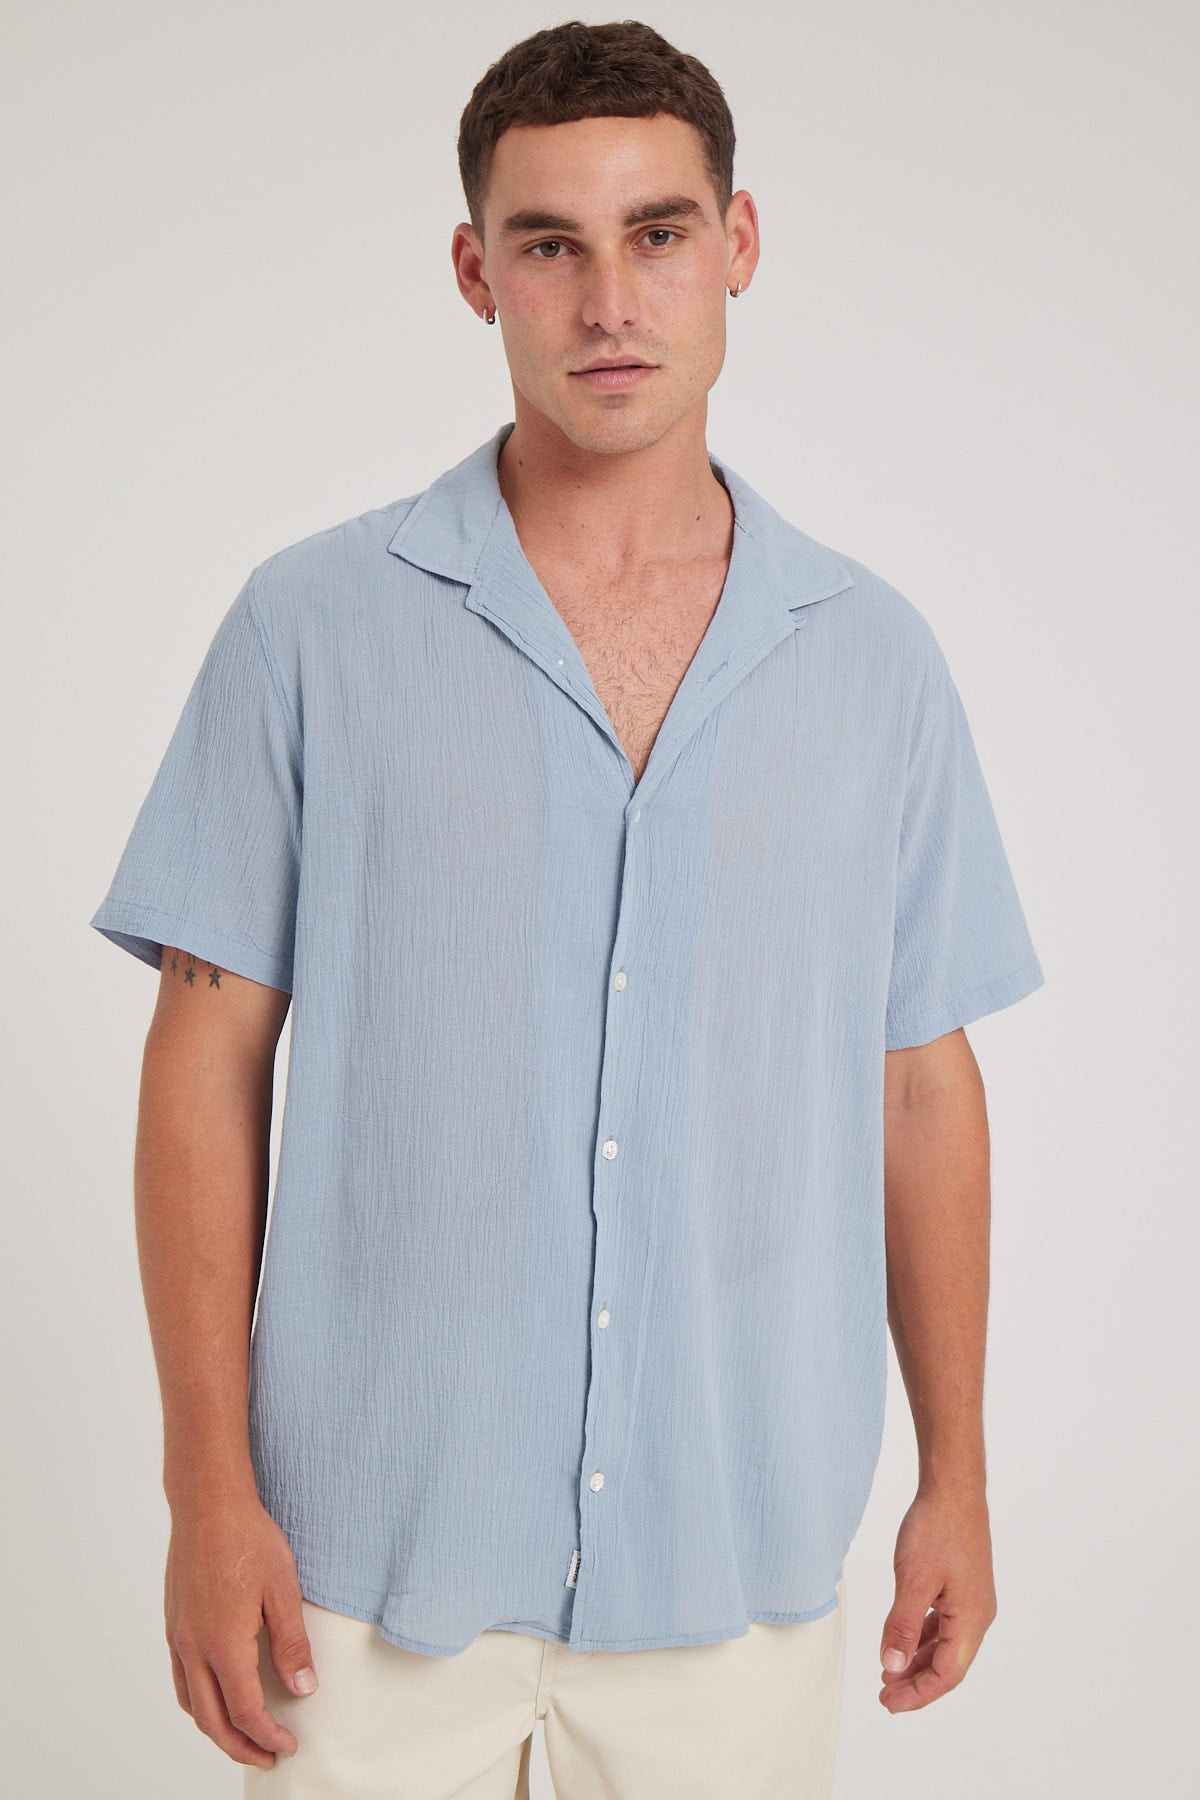 Academy Brand Bedford Shirt Pearl Blue – Universal Store